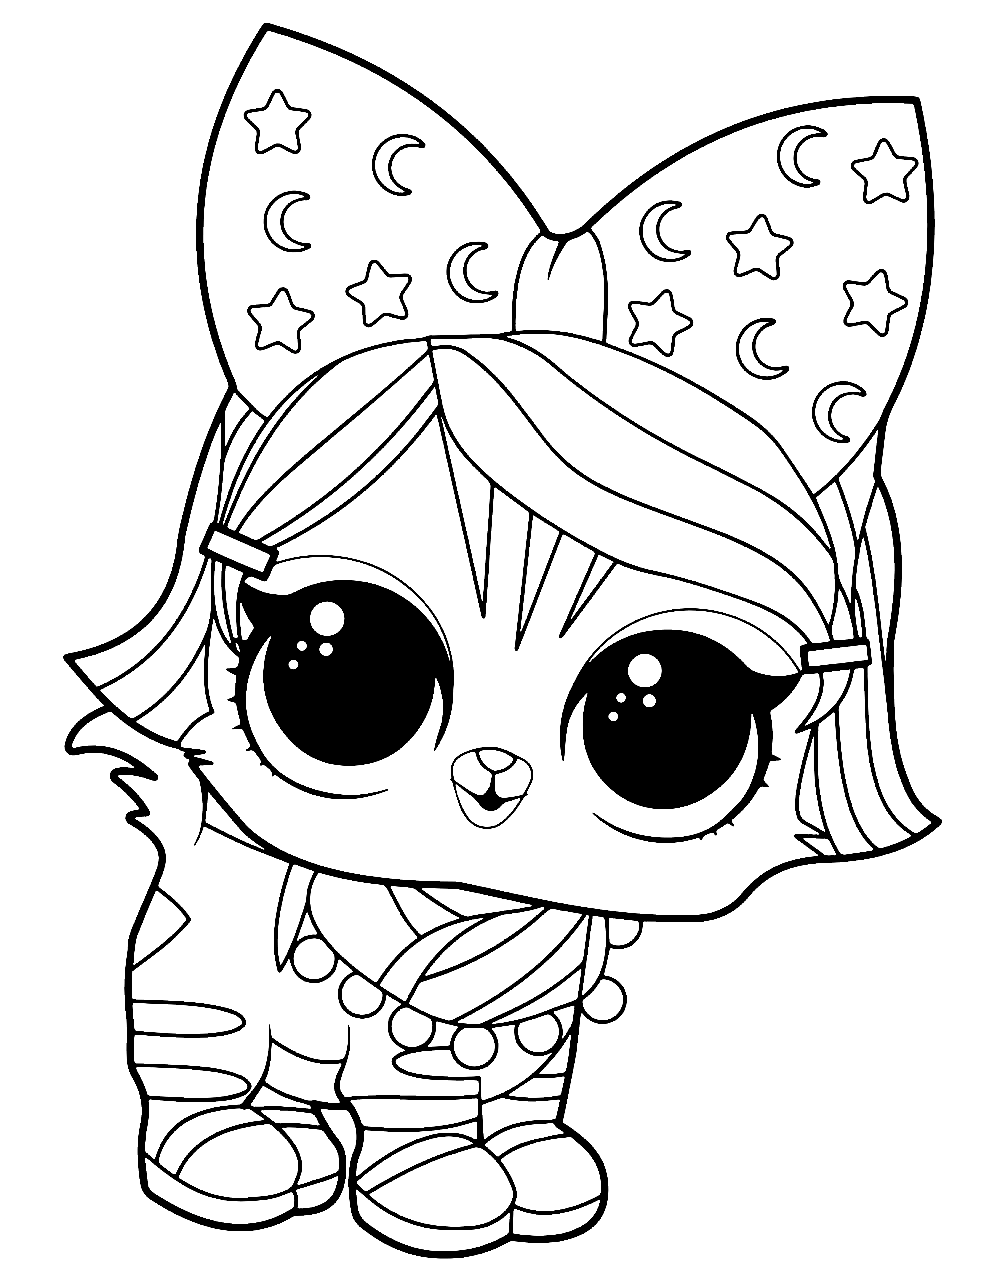 Lol pets coloring pages printable for free download